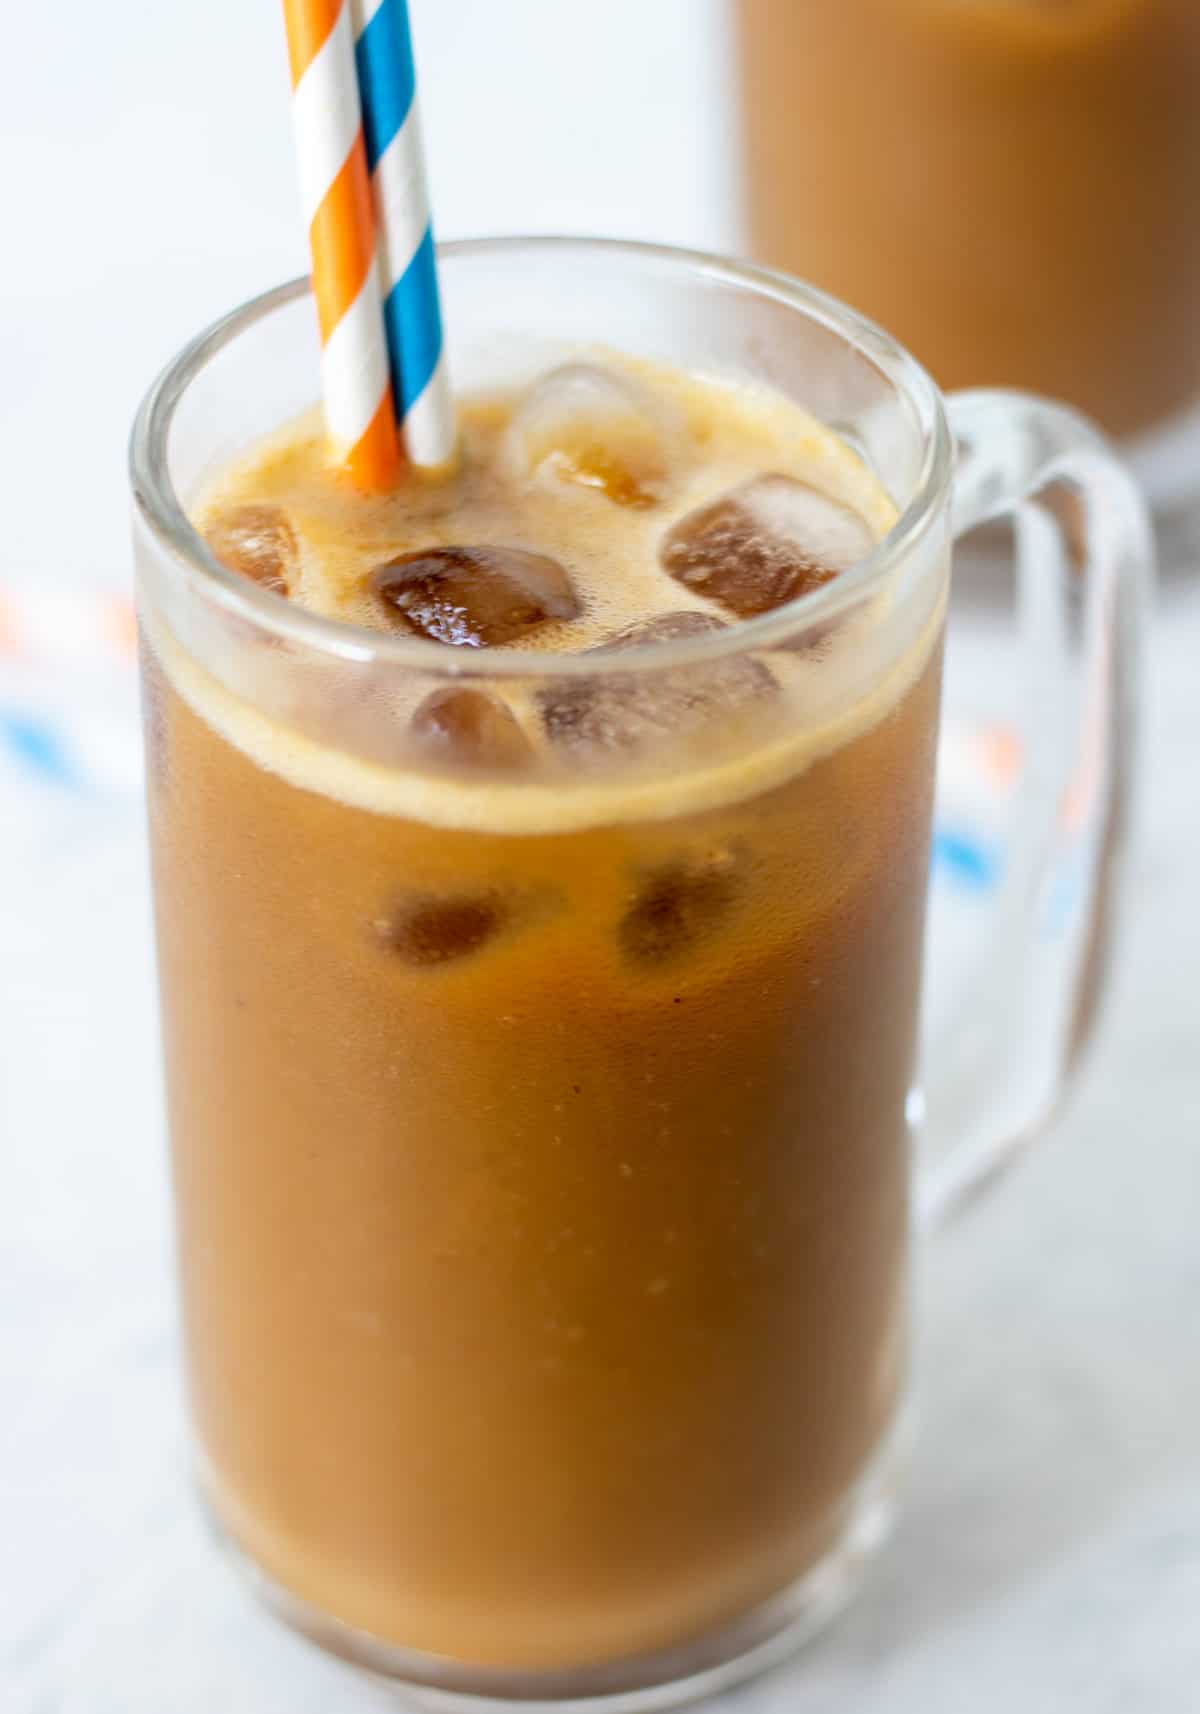 pumpkin coffee smoothie in clear glass with ice and two straws. A blue and white straw and an orange and white straw for serving.